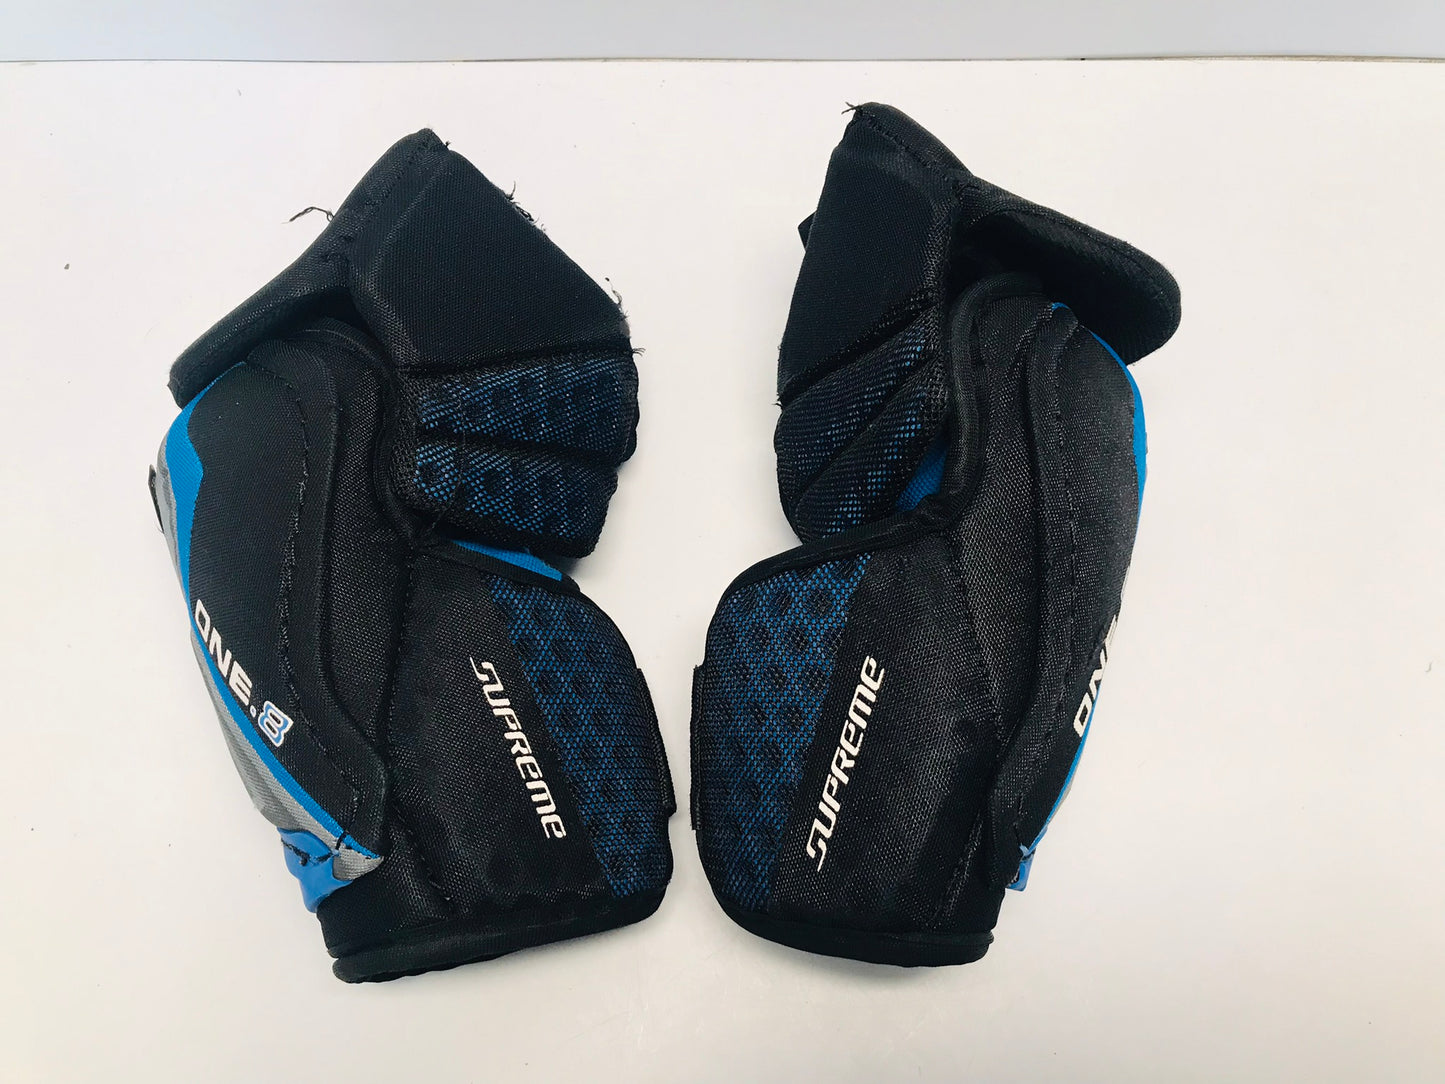 Hockey Elbow Pads Men's Size Small Bauer Supreme One.8 Blue Black Excellent